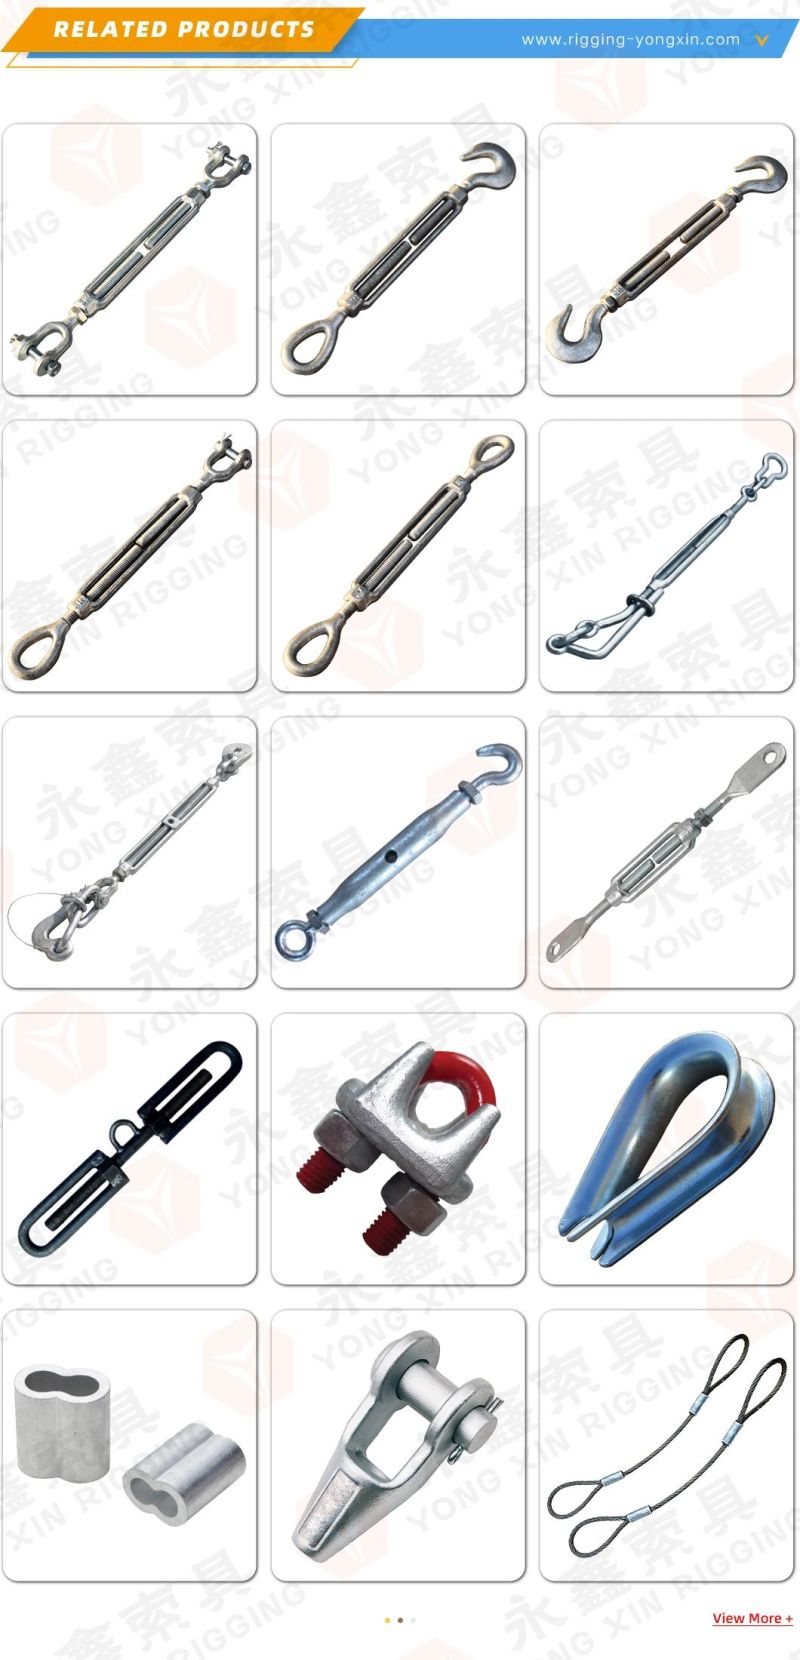 High Quality DIN1480 Galvanized Drop Forged Eye Hook Turnbuckle